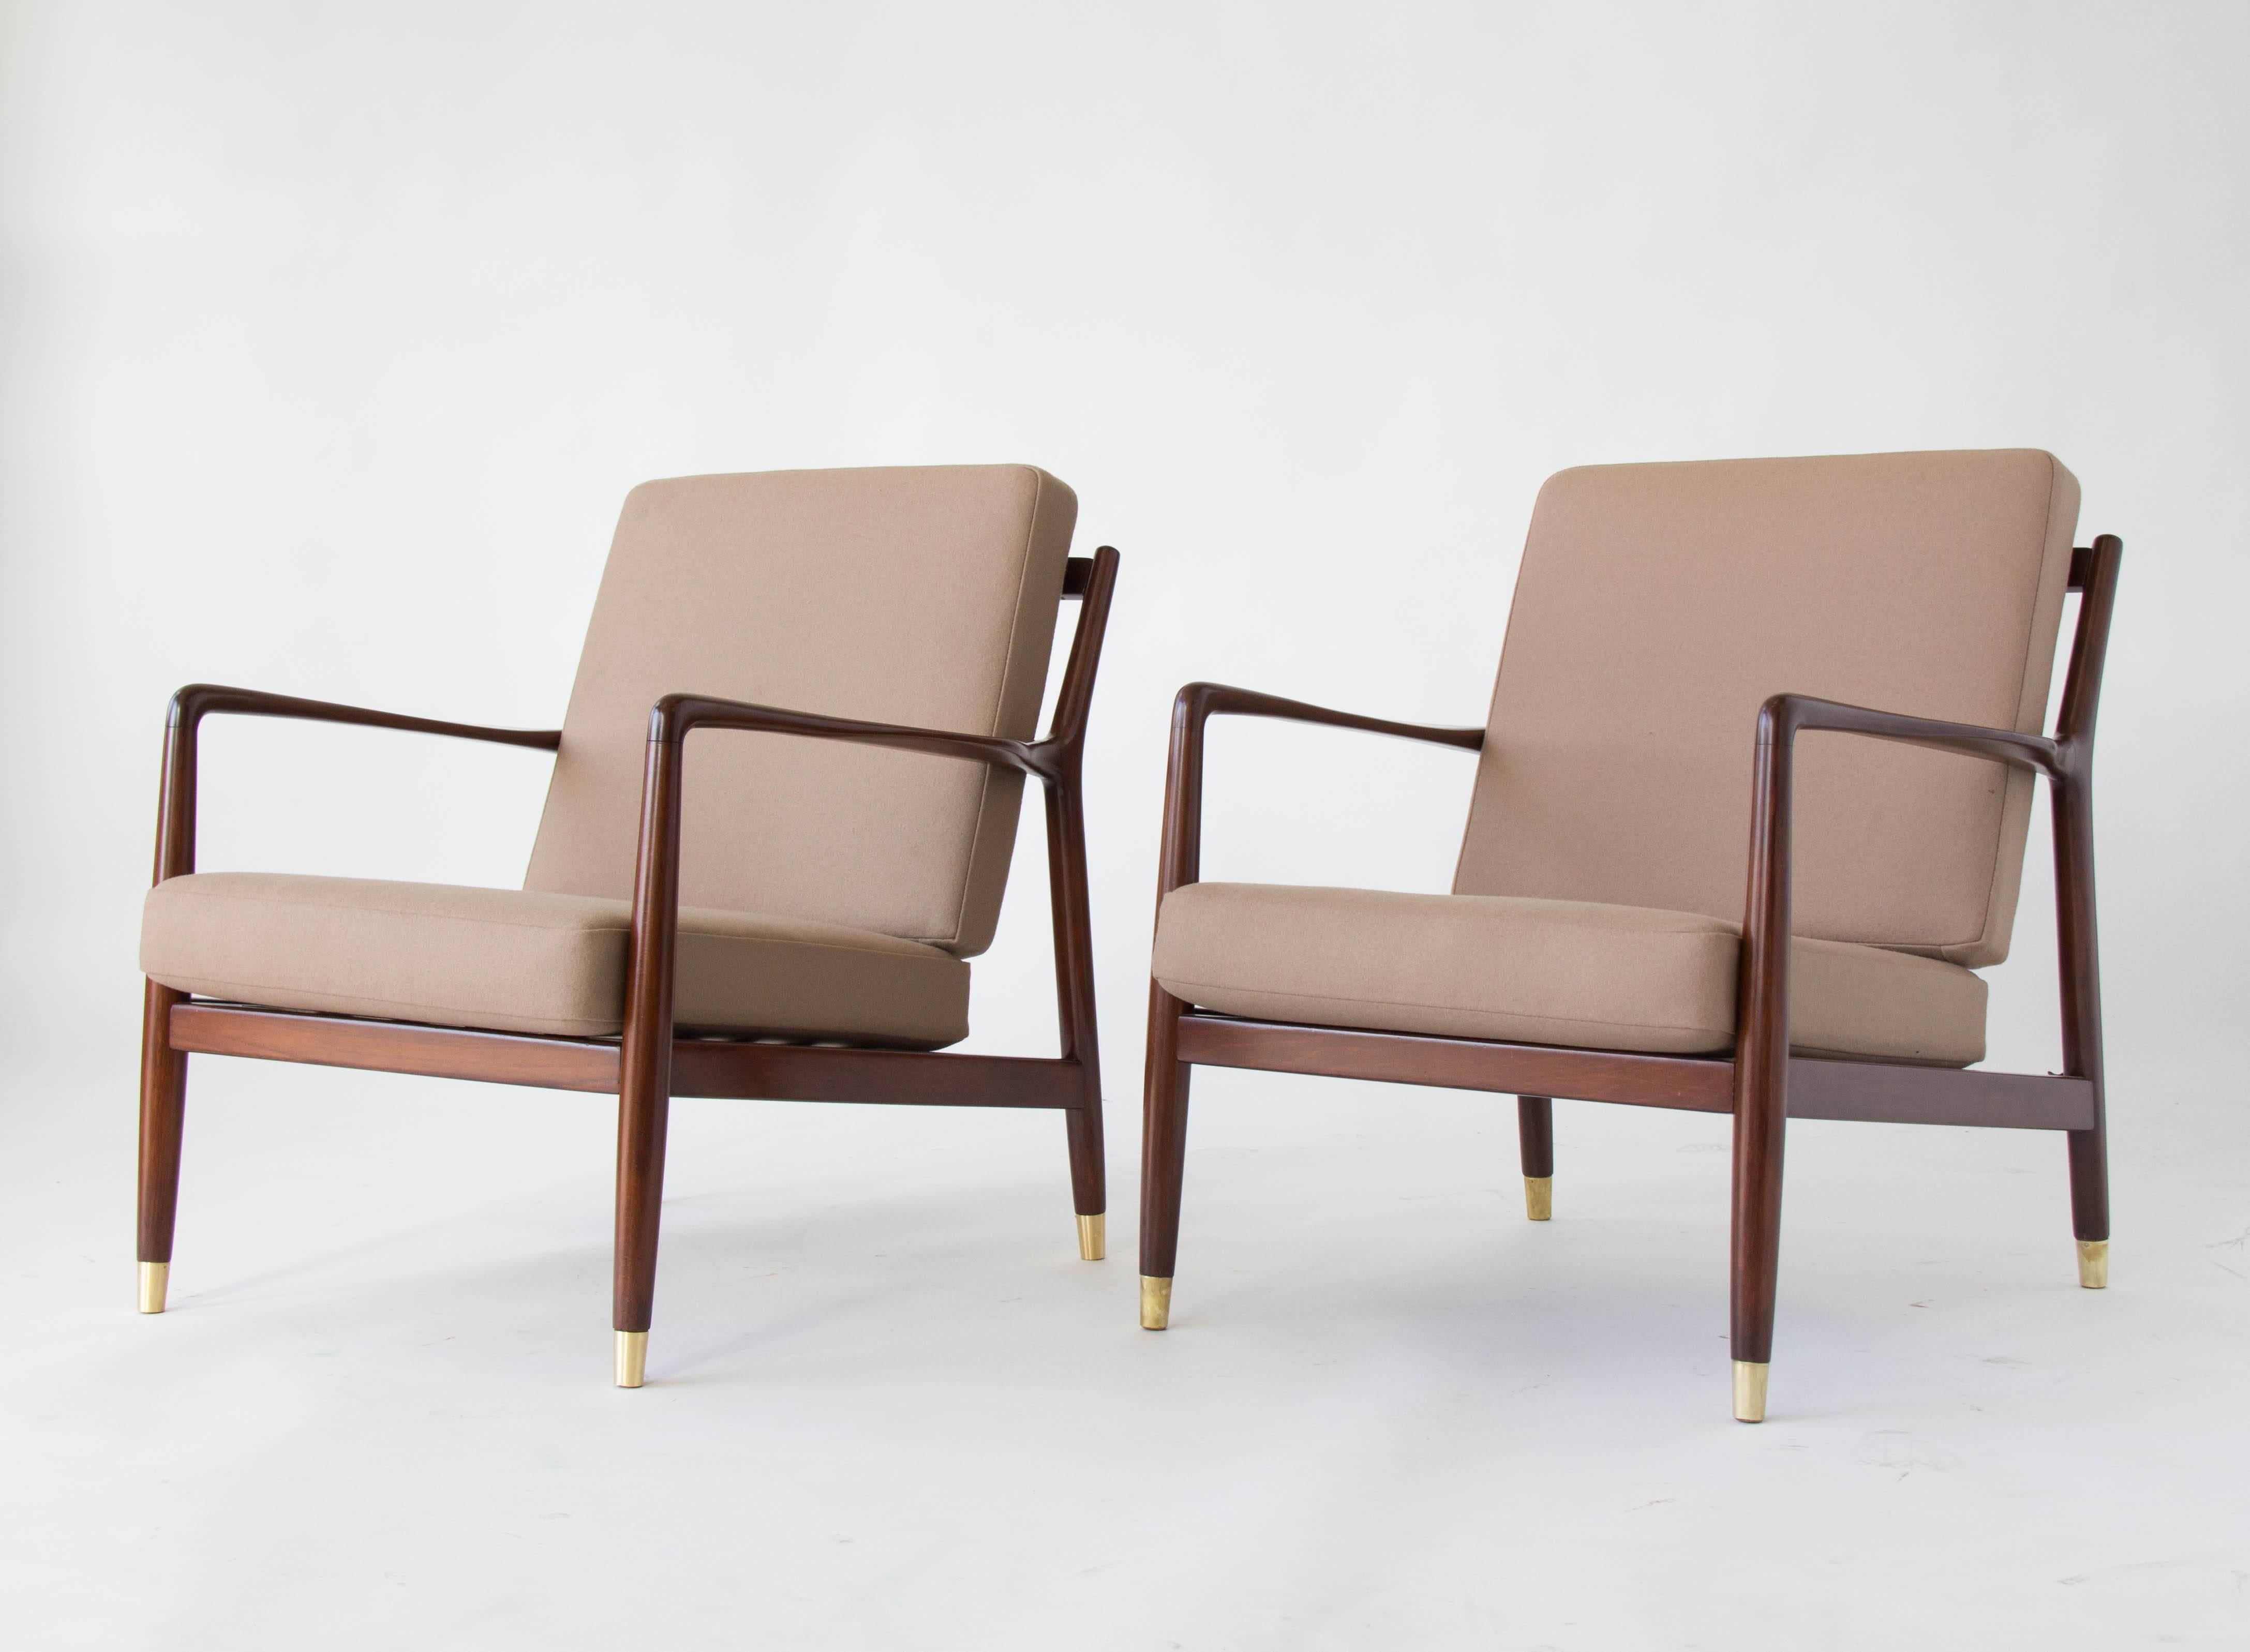 Scandinavian Modern Pair of Lounge Chairs with Brass-Capped Legs by Folke Ohlsson for DUX